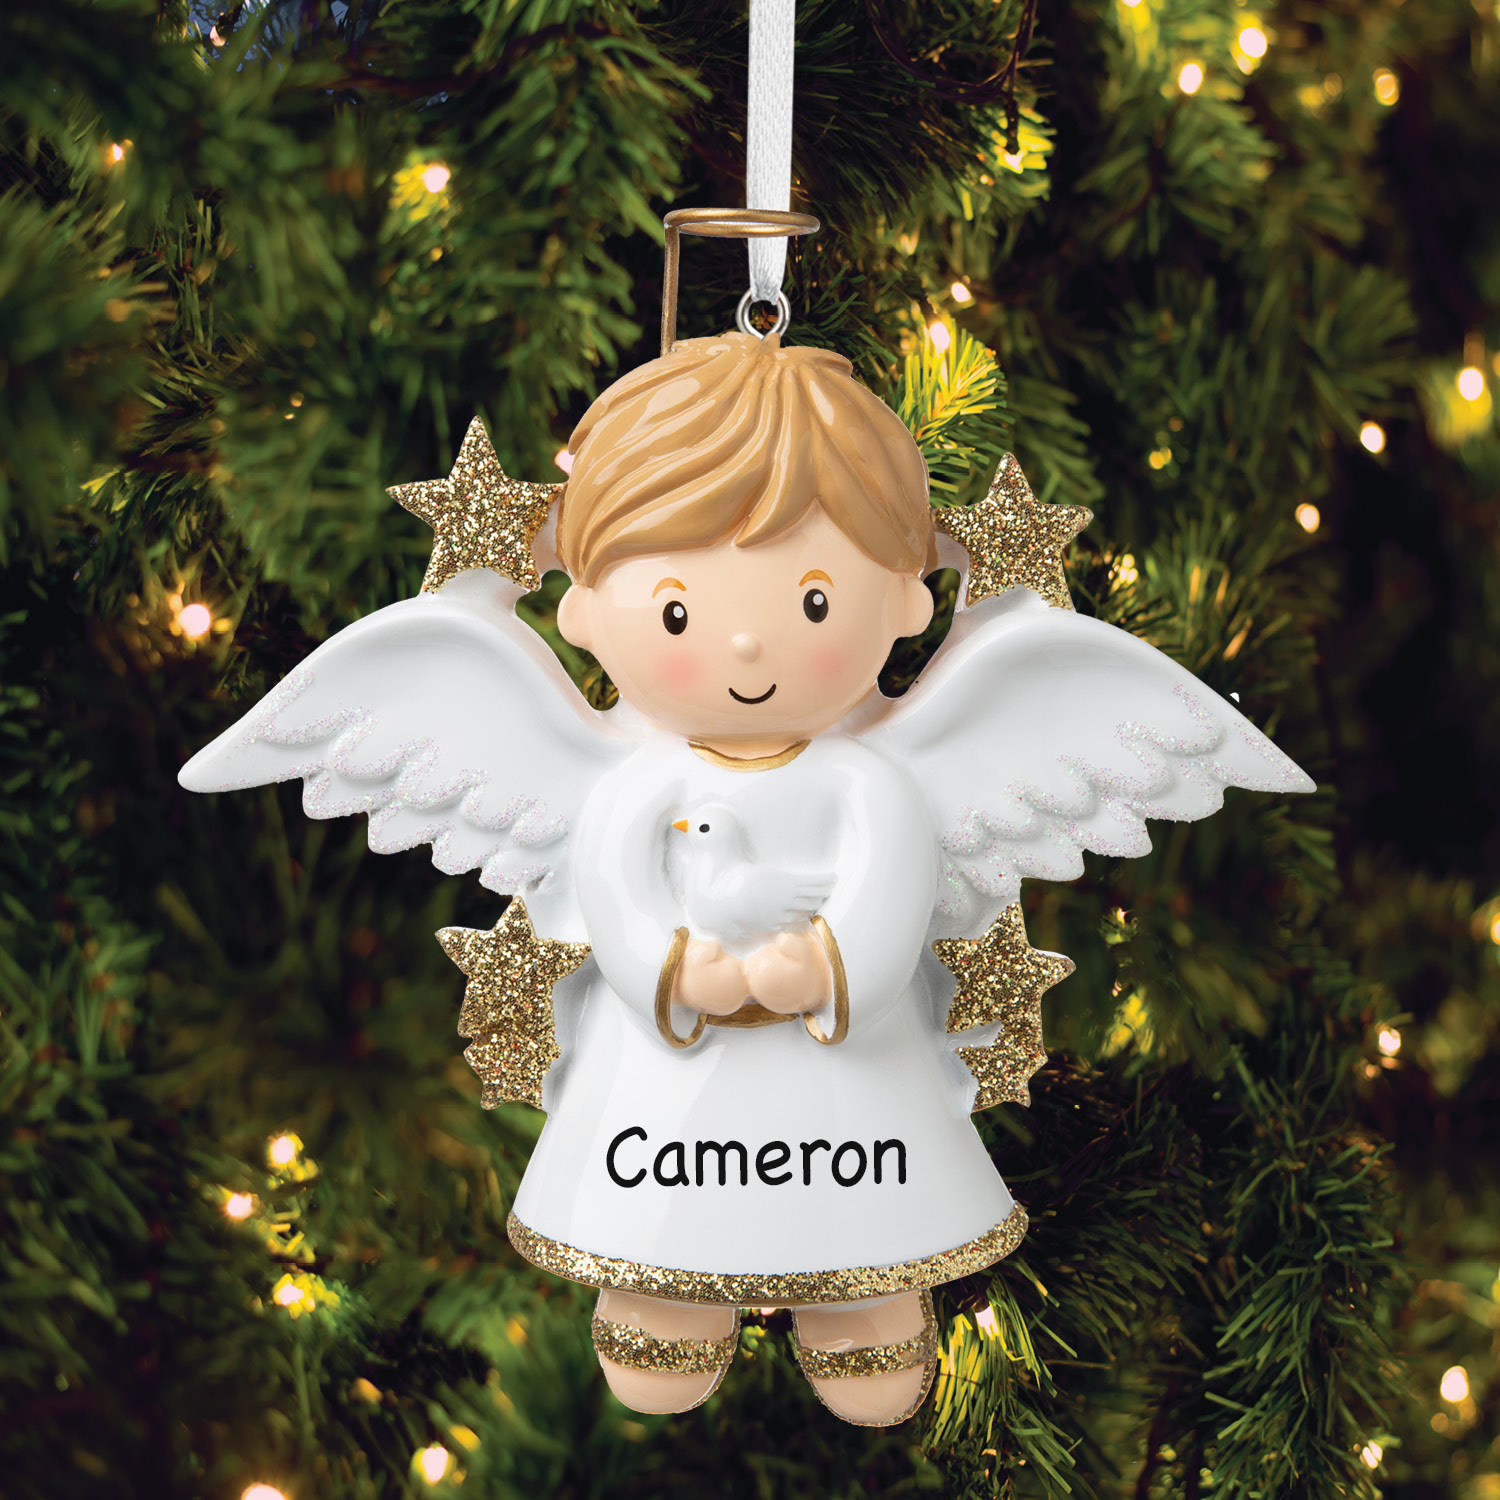 gold Holiday tree ornament Masked angel Christmas ornament